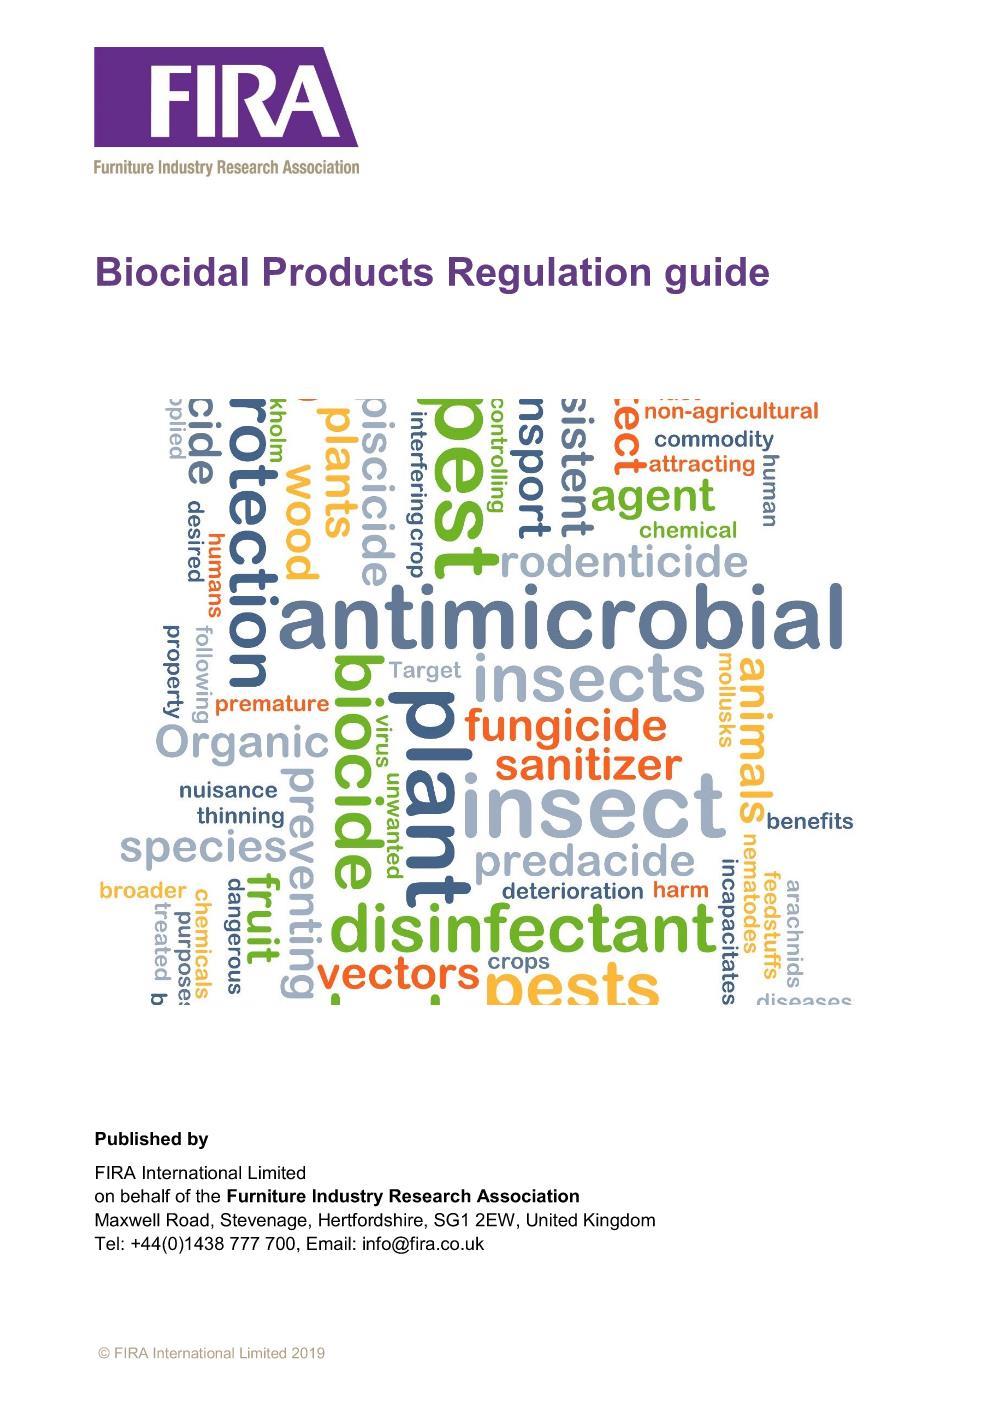 Biocidal Products Regulation Guide